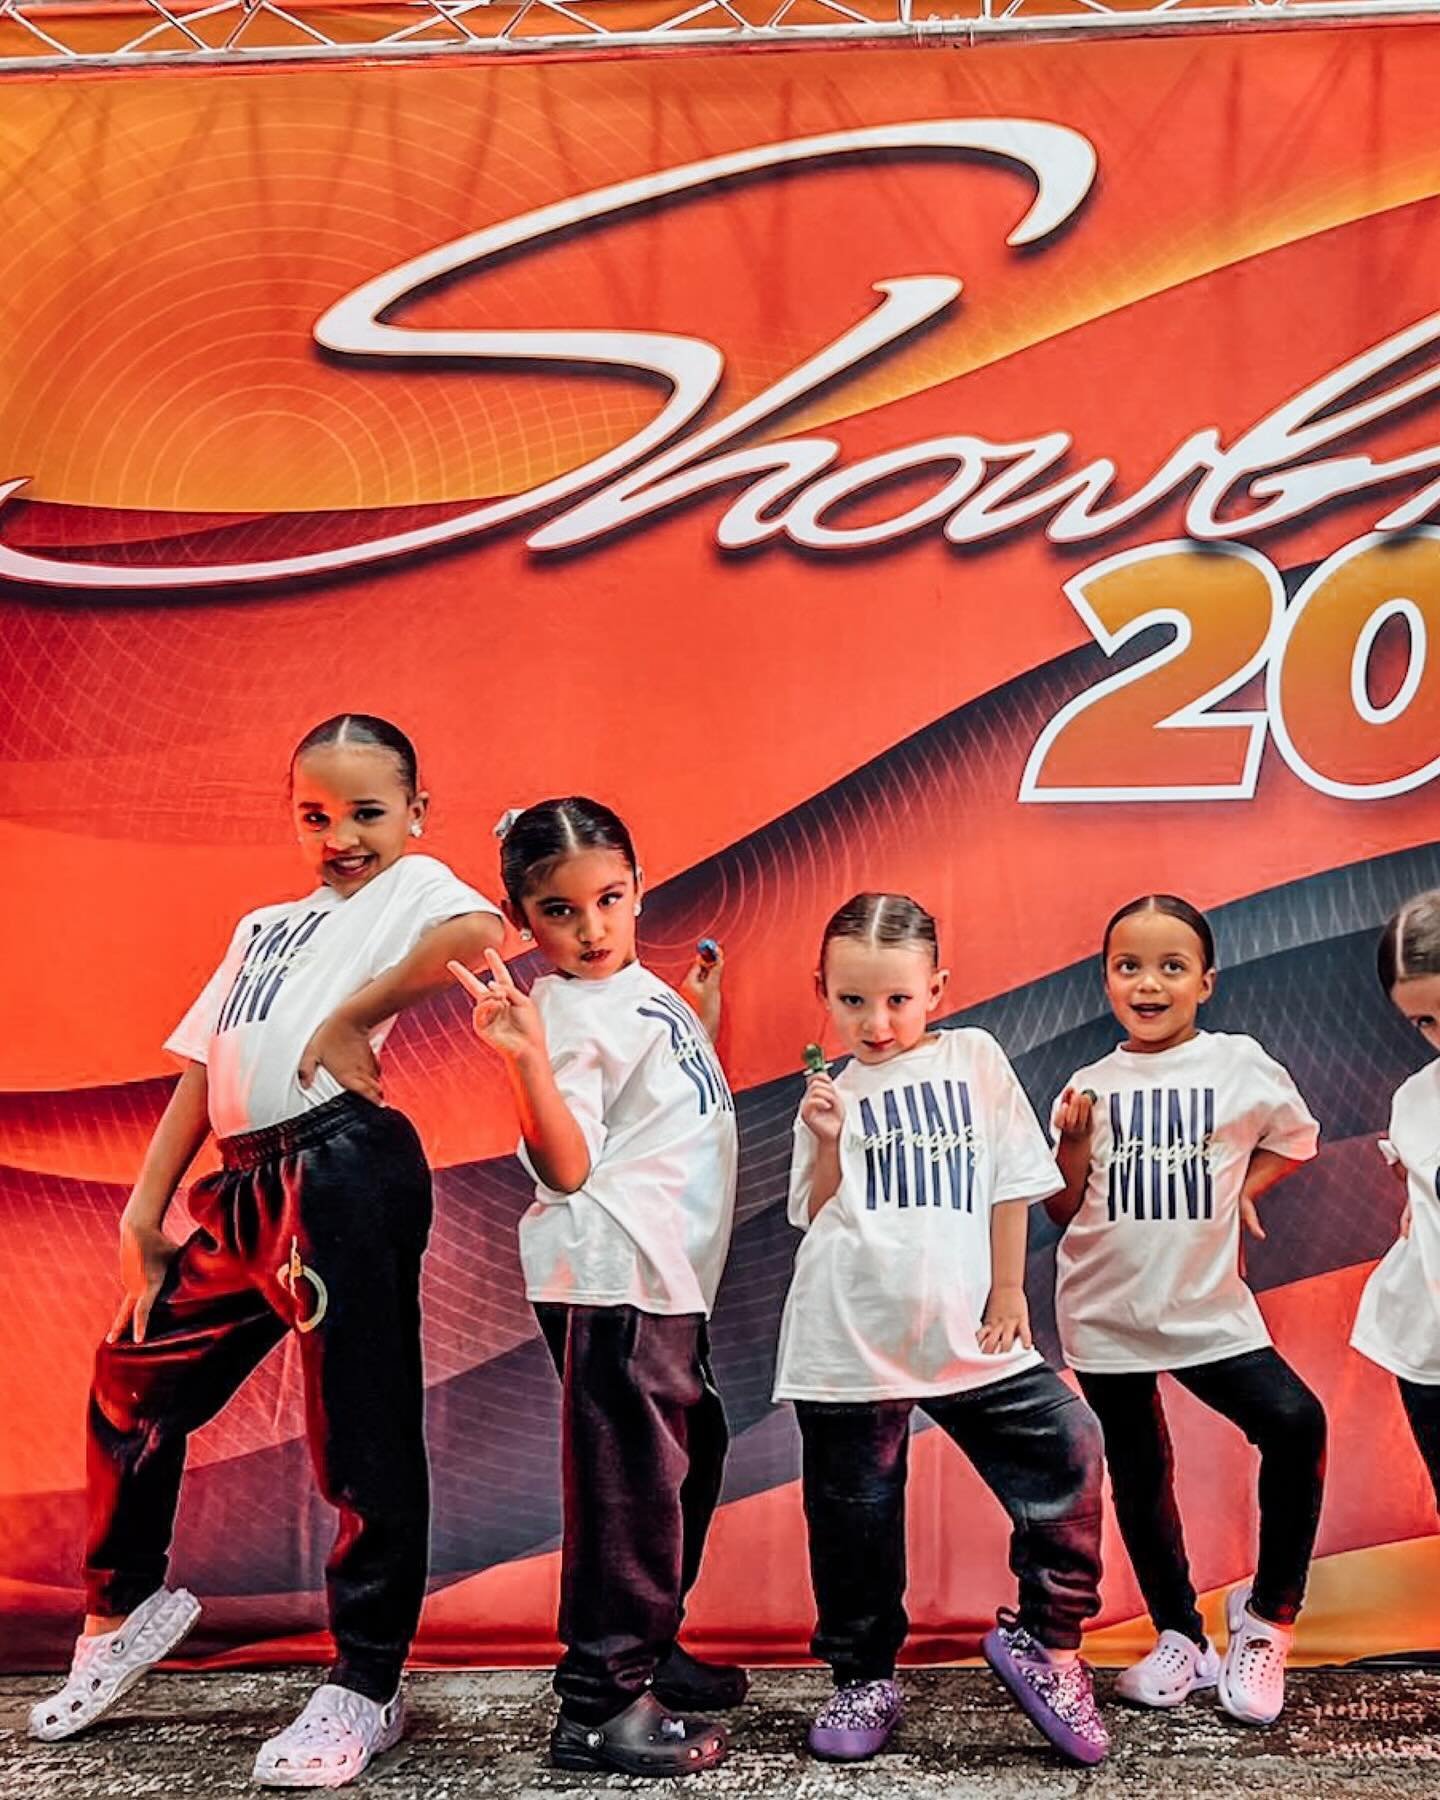 We could not be more proud of our mini but mighty dancers for &ldquo;showing&rdquo; up at @showbiztalent! We cannot wait to see what you bring to the stage at nationals!! 💜💚